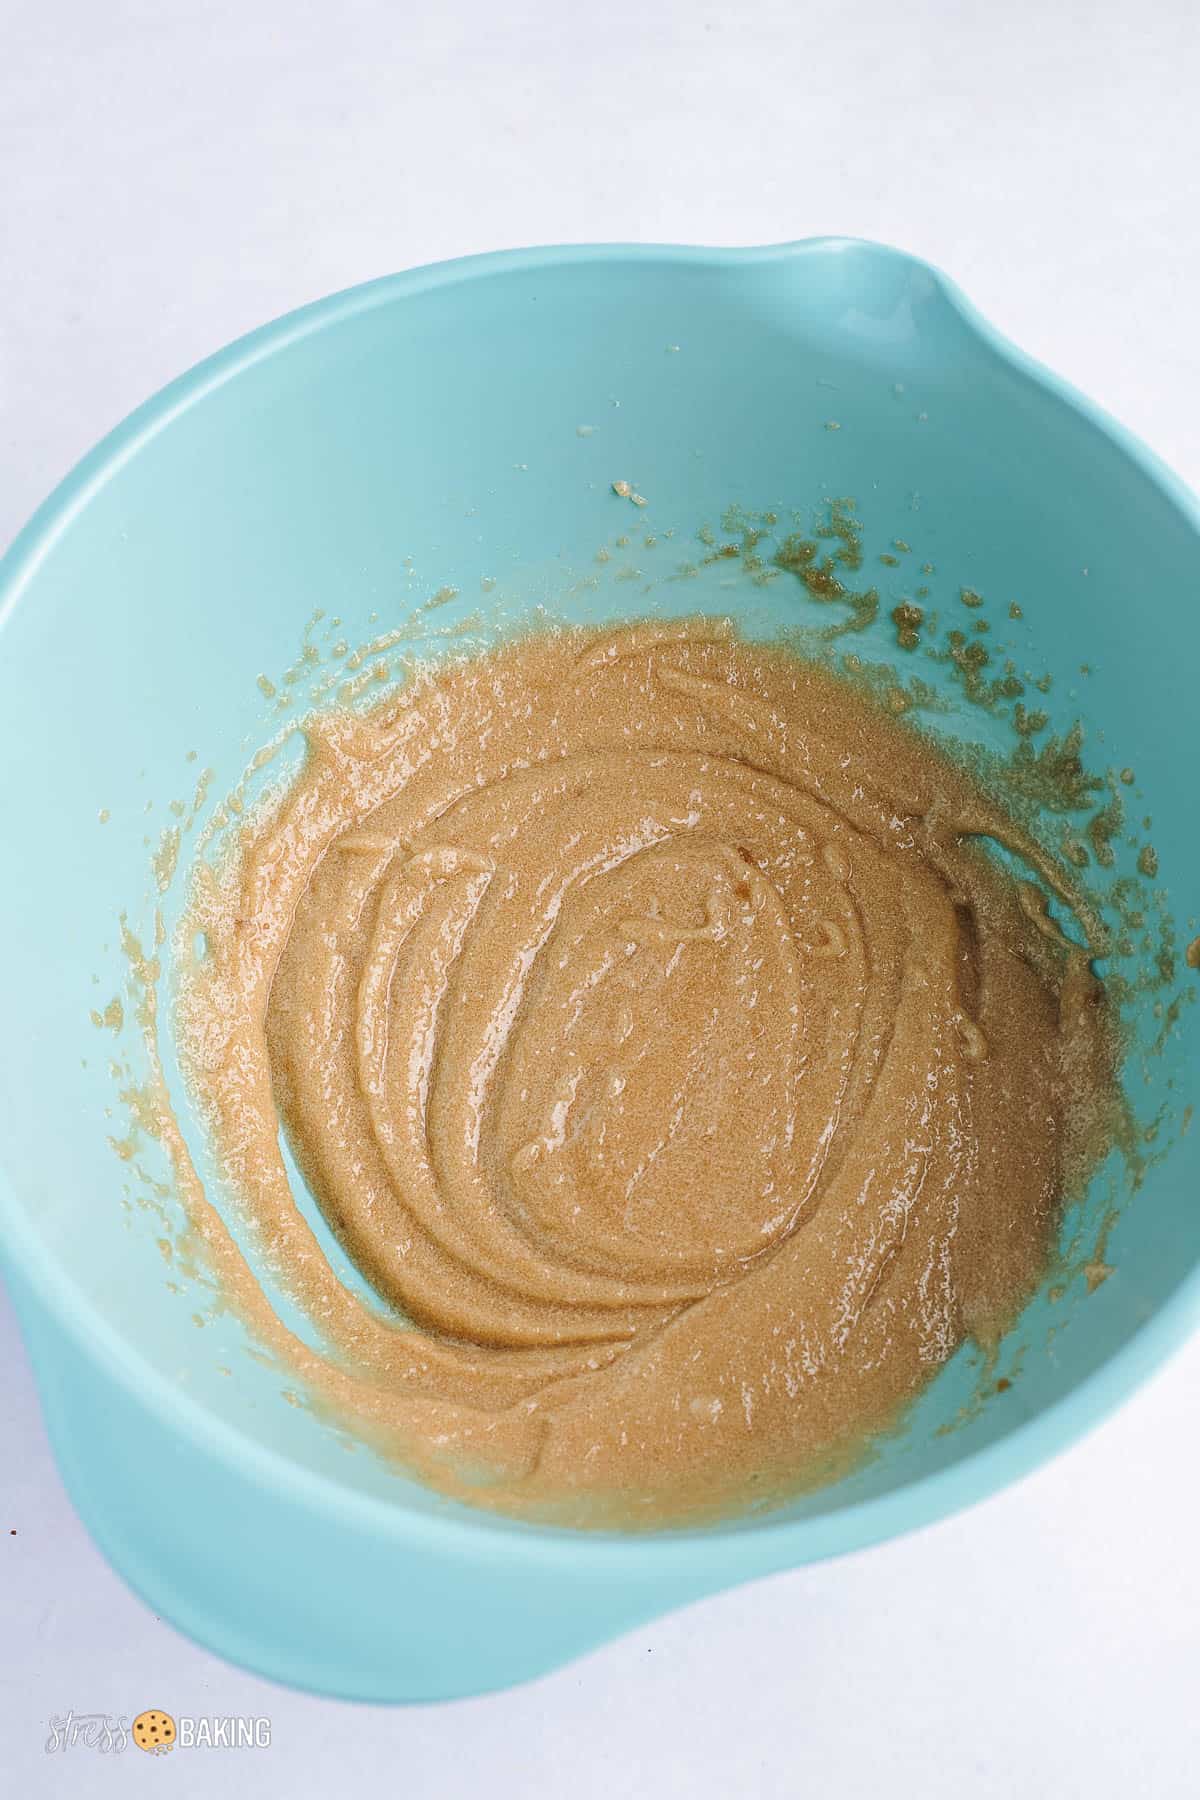 Tan wet batter mixture in a teal mixing bowl